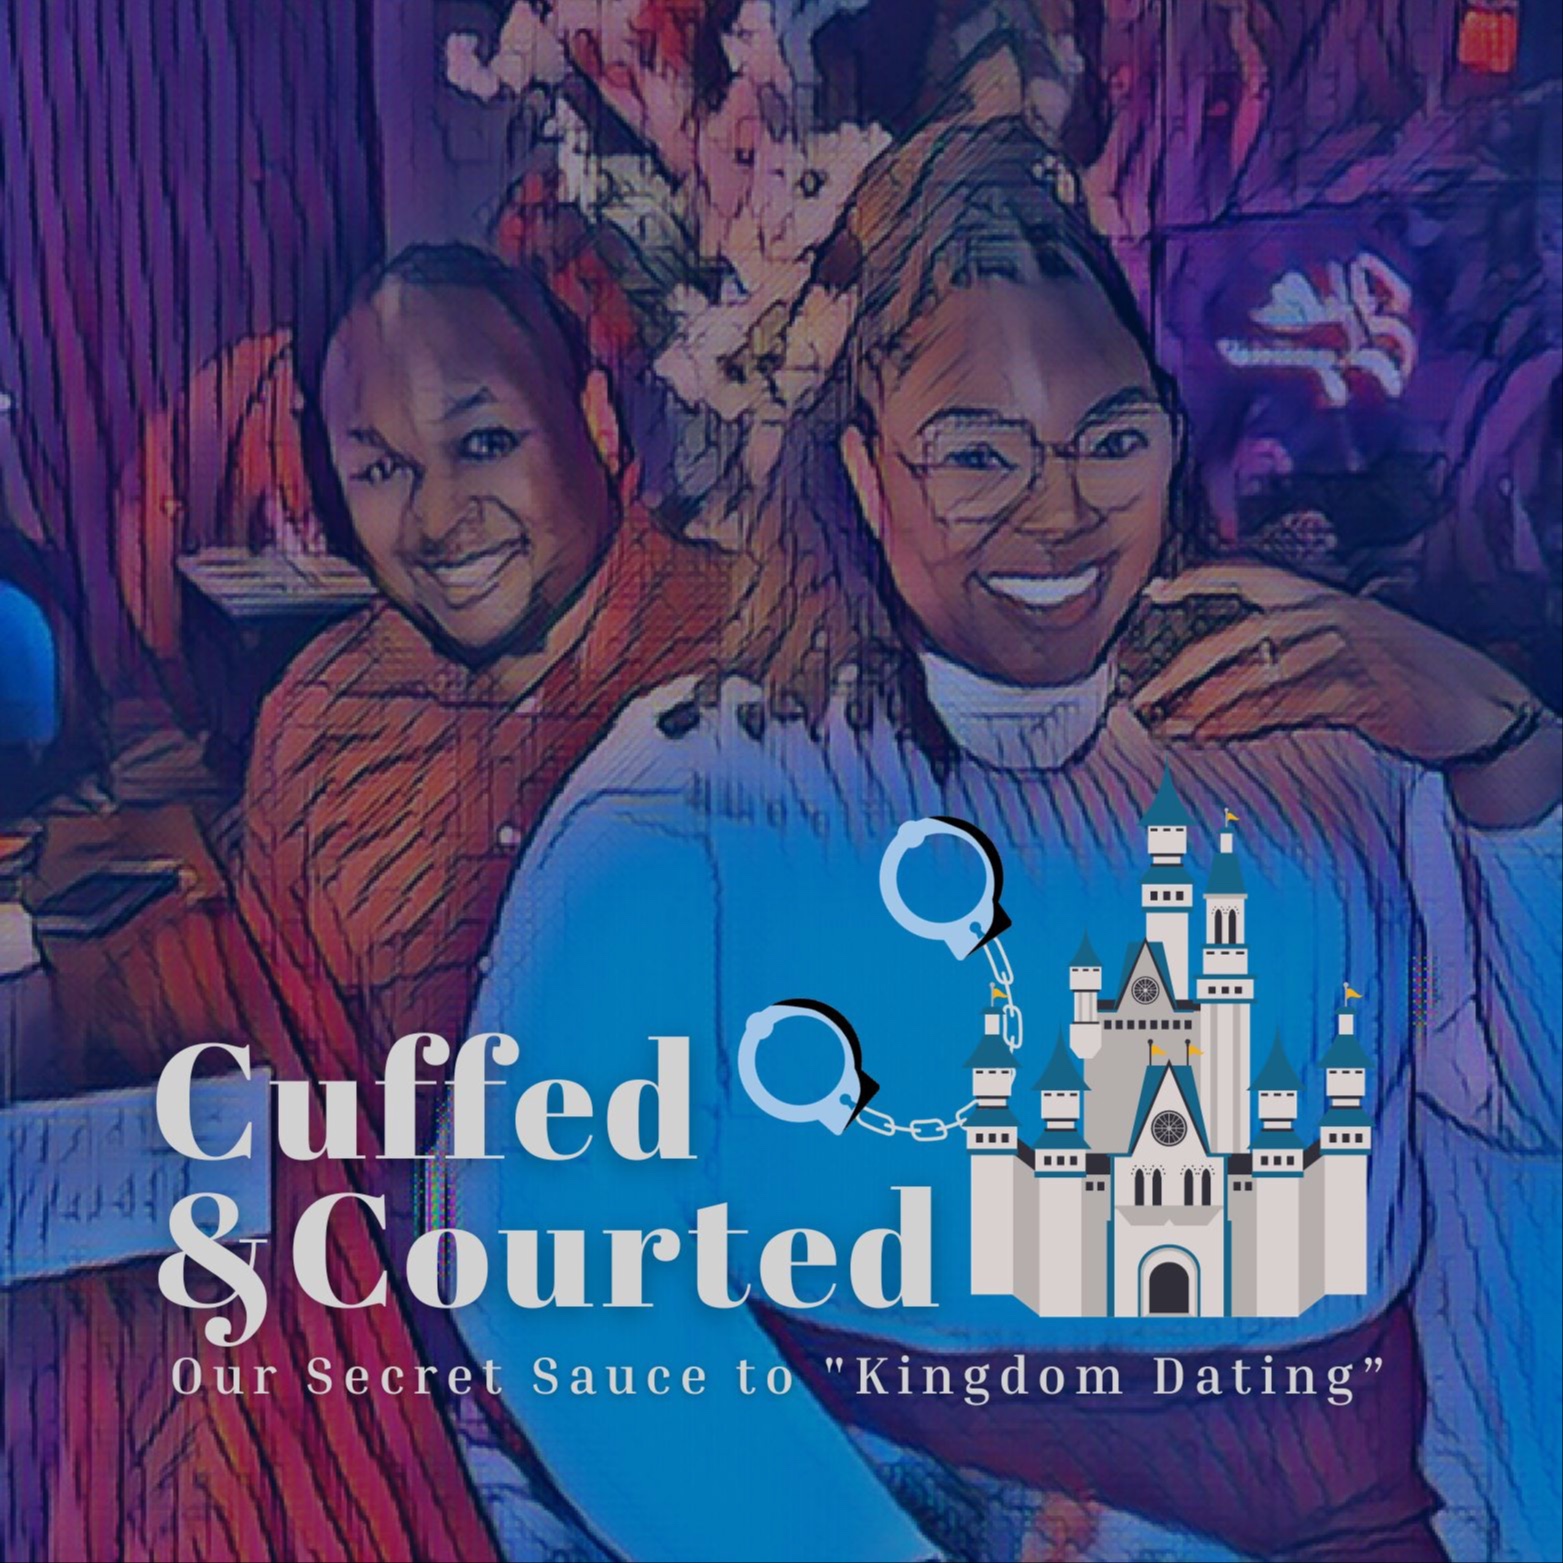 Cuffed & Courted